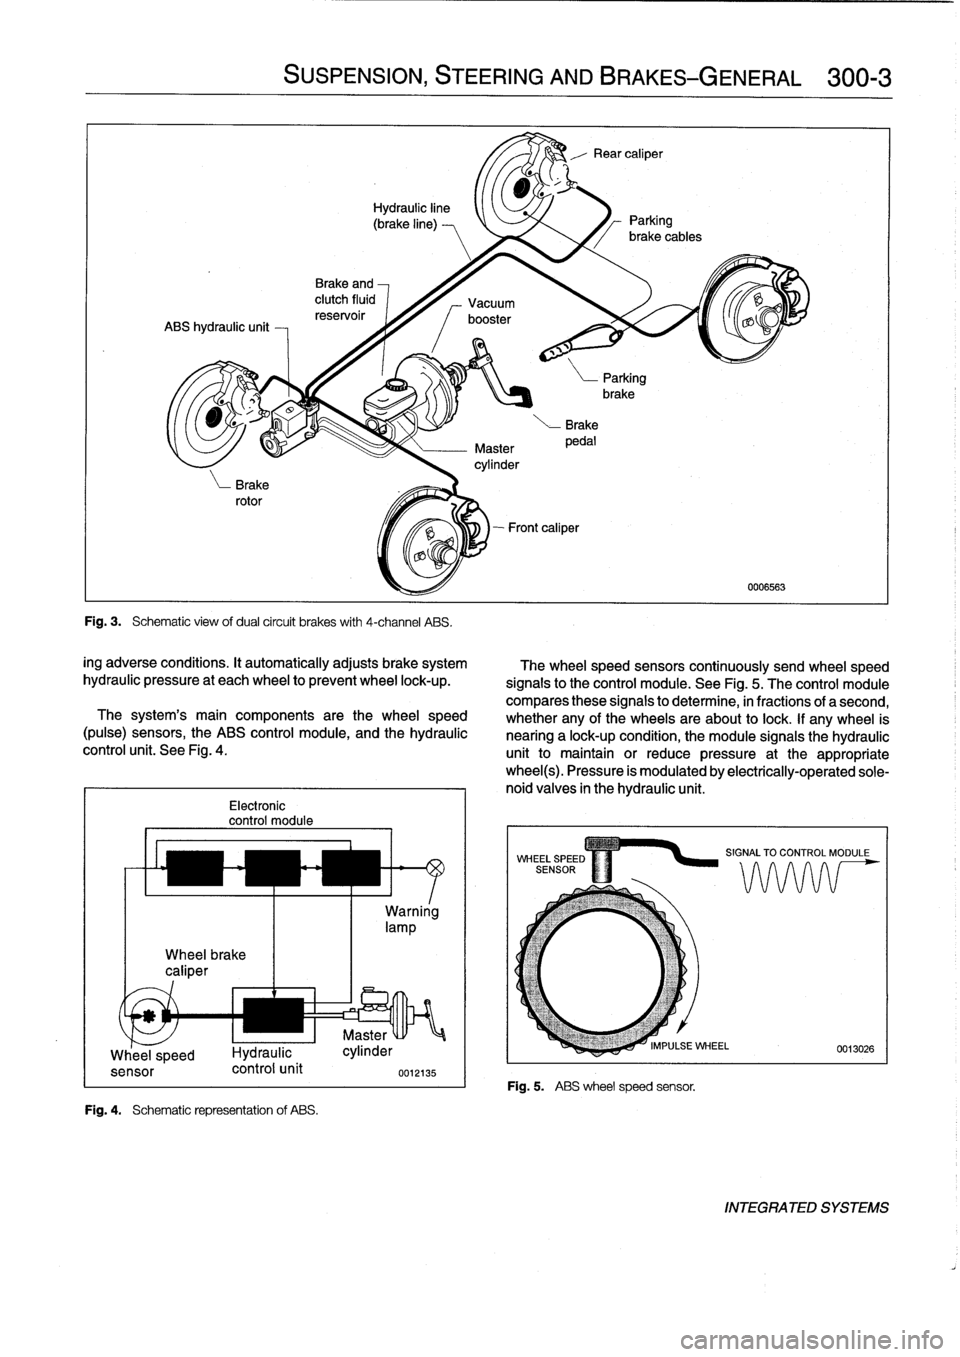 BMW 318i 1998 E36 Owners Manual 
Wheel
brake
caliper

Electronic
control
module
Fig
.
4
.

	

Schematic
representation
of
ABS
.

SUSPENSION,
STEERING
ANDBRAKES-GENERAL

	

300-3

Fig
.
3
.

	

Schematic
view
ofdual
circuit
brakes
wi